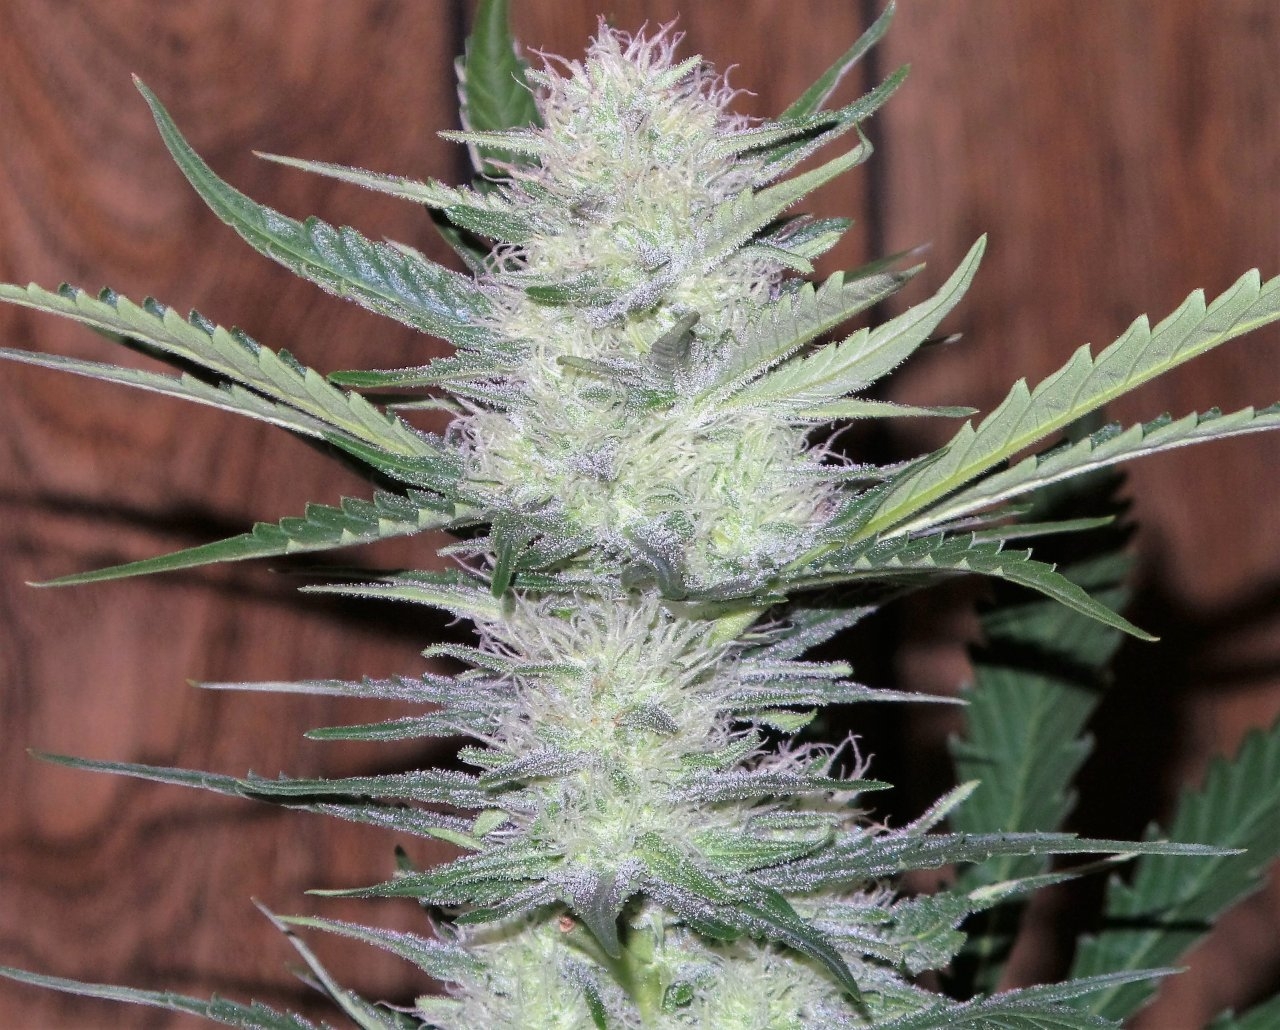 BbBliss 57 days top cola.jpg